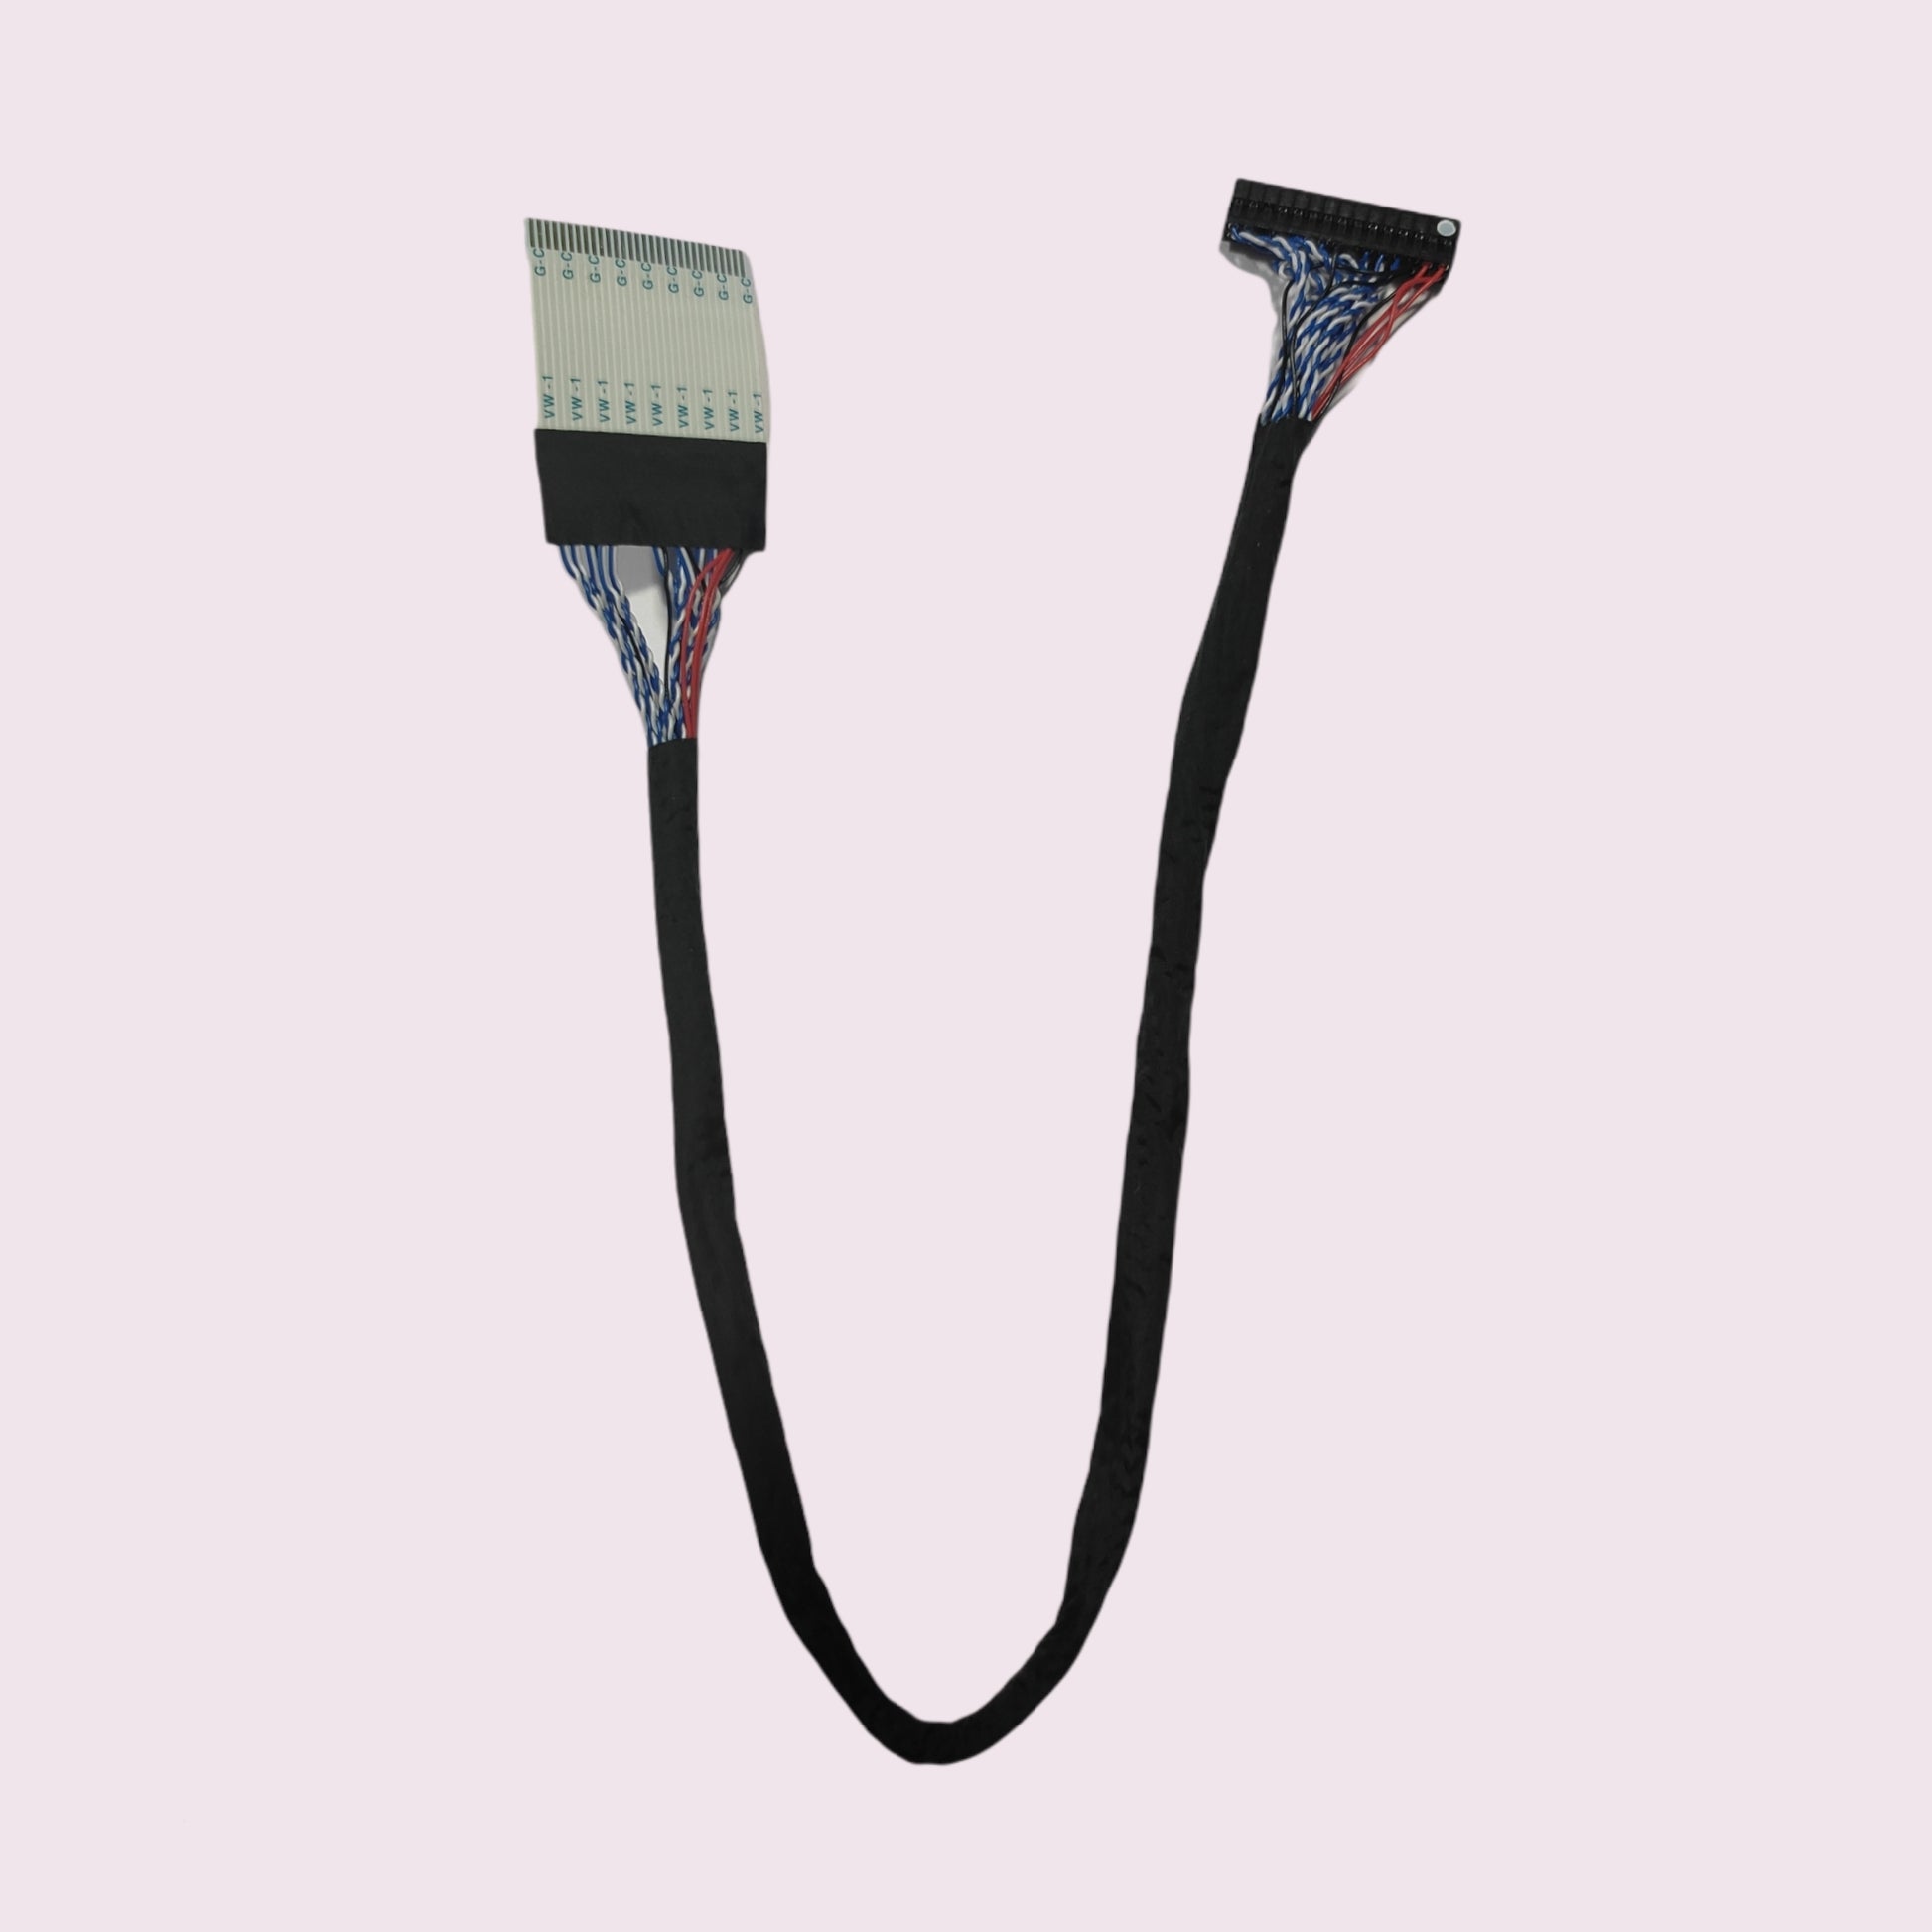 LVDS Cable 01 - Faritha